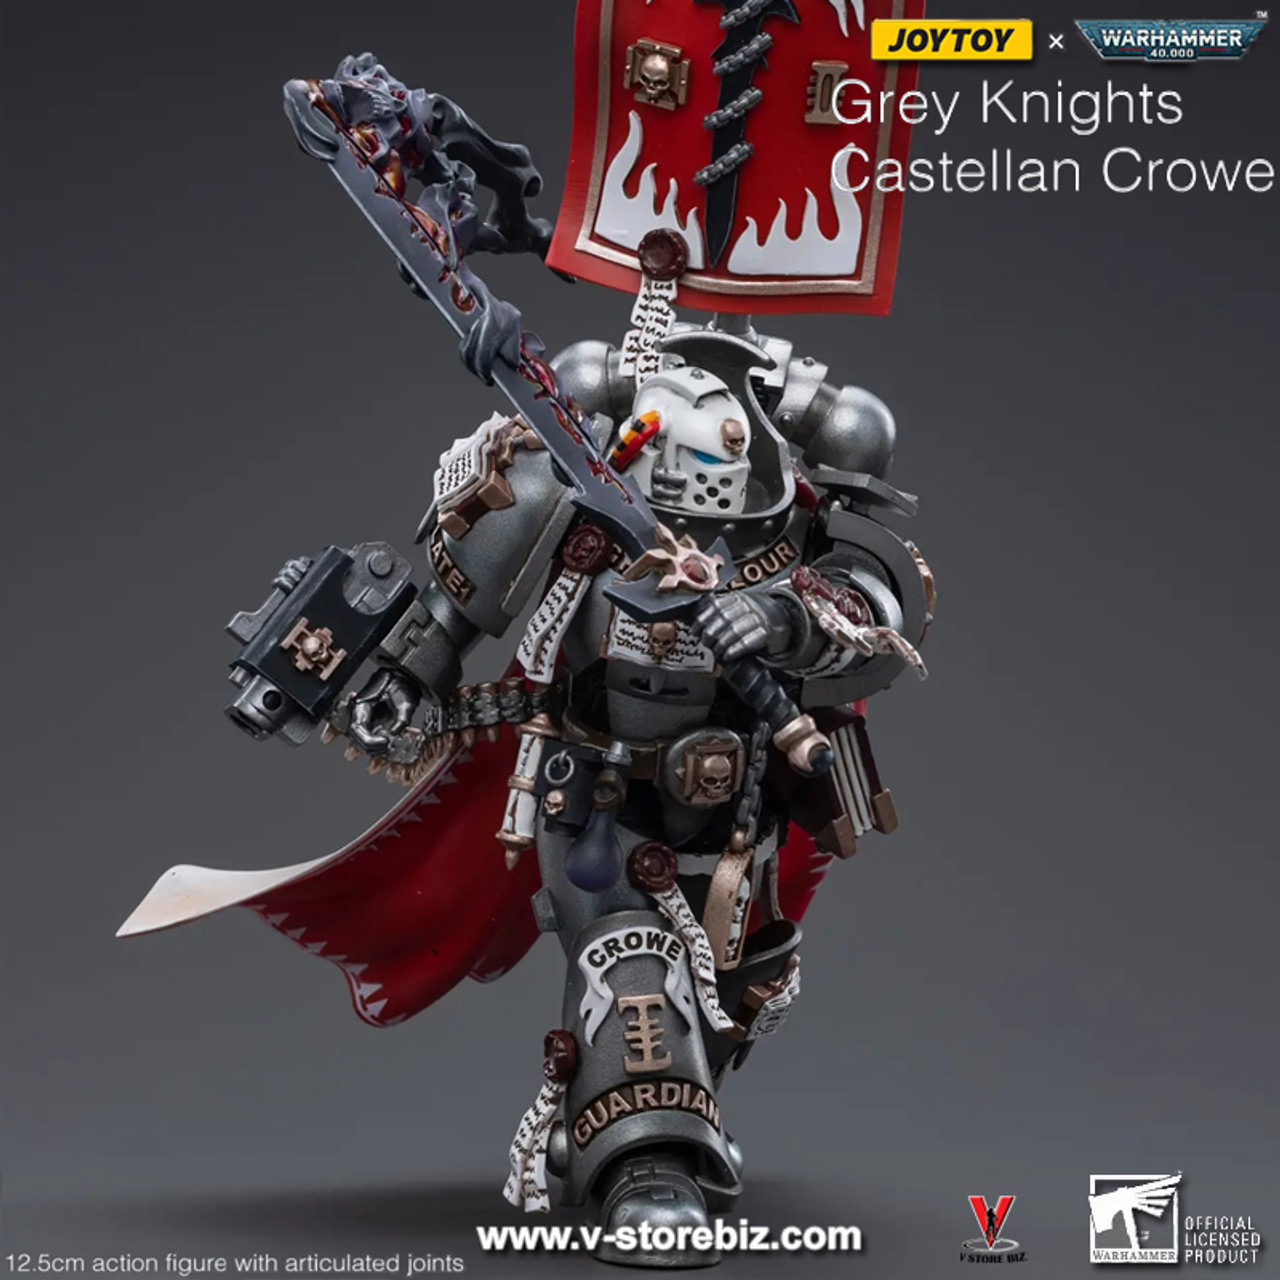 Sold Out Joytoy Warhammer 40k Jt3518 Grey Knights Castellan Crowe V Store Collectibles 2007